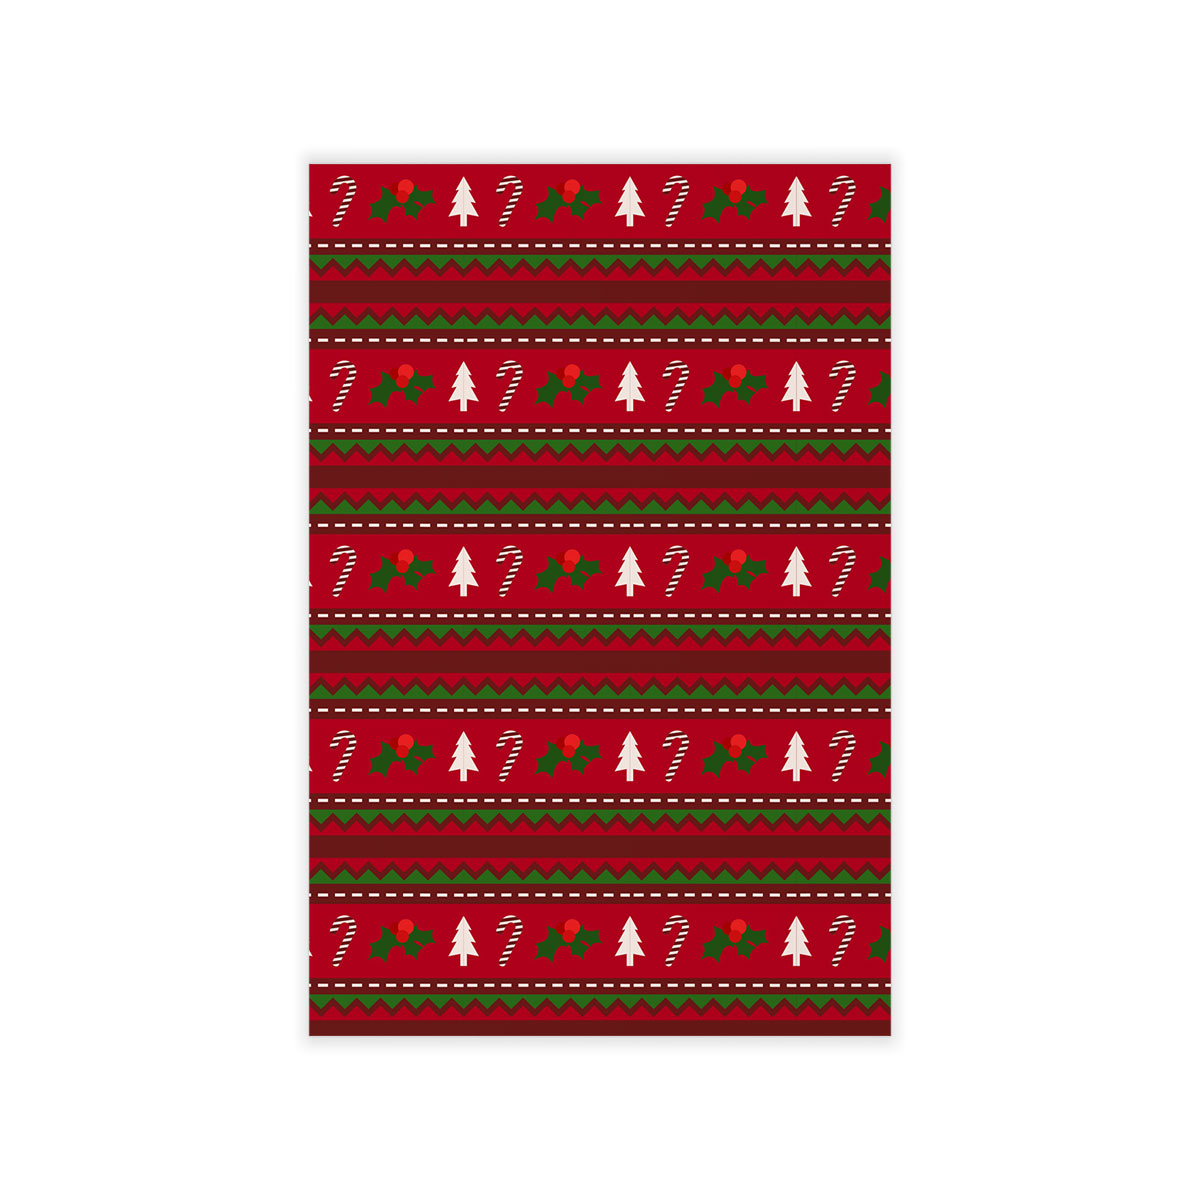 Red Green And White Christmas Tree, Holly Leaf With Candy Cane.jpg Wall Decals